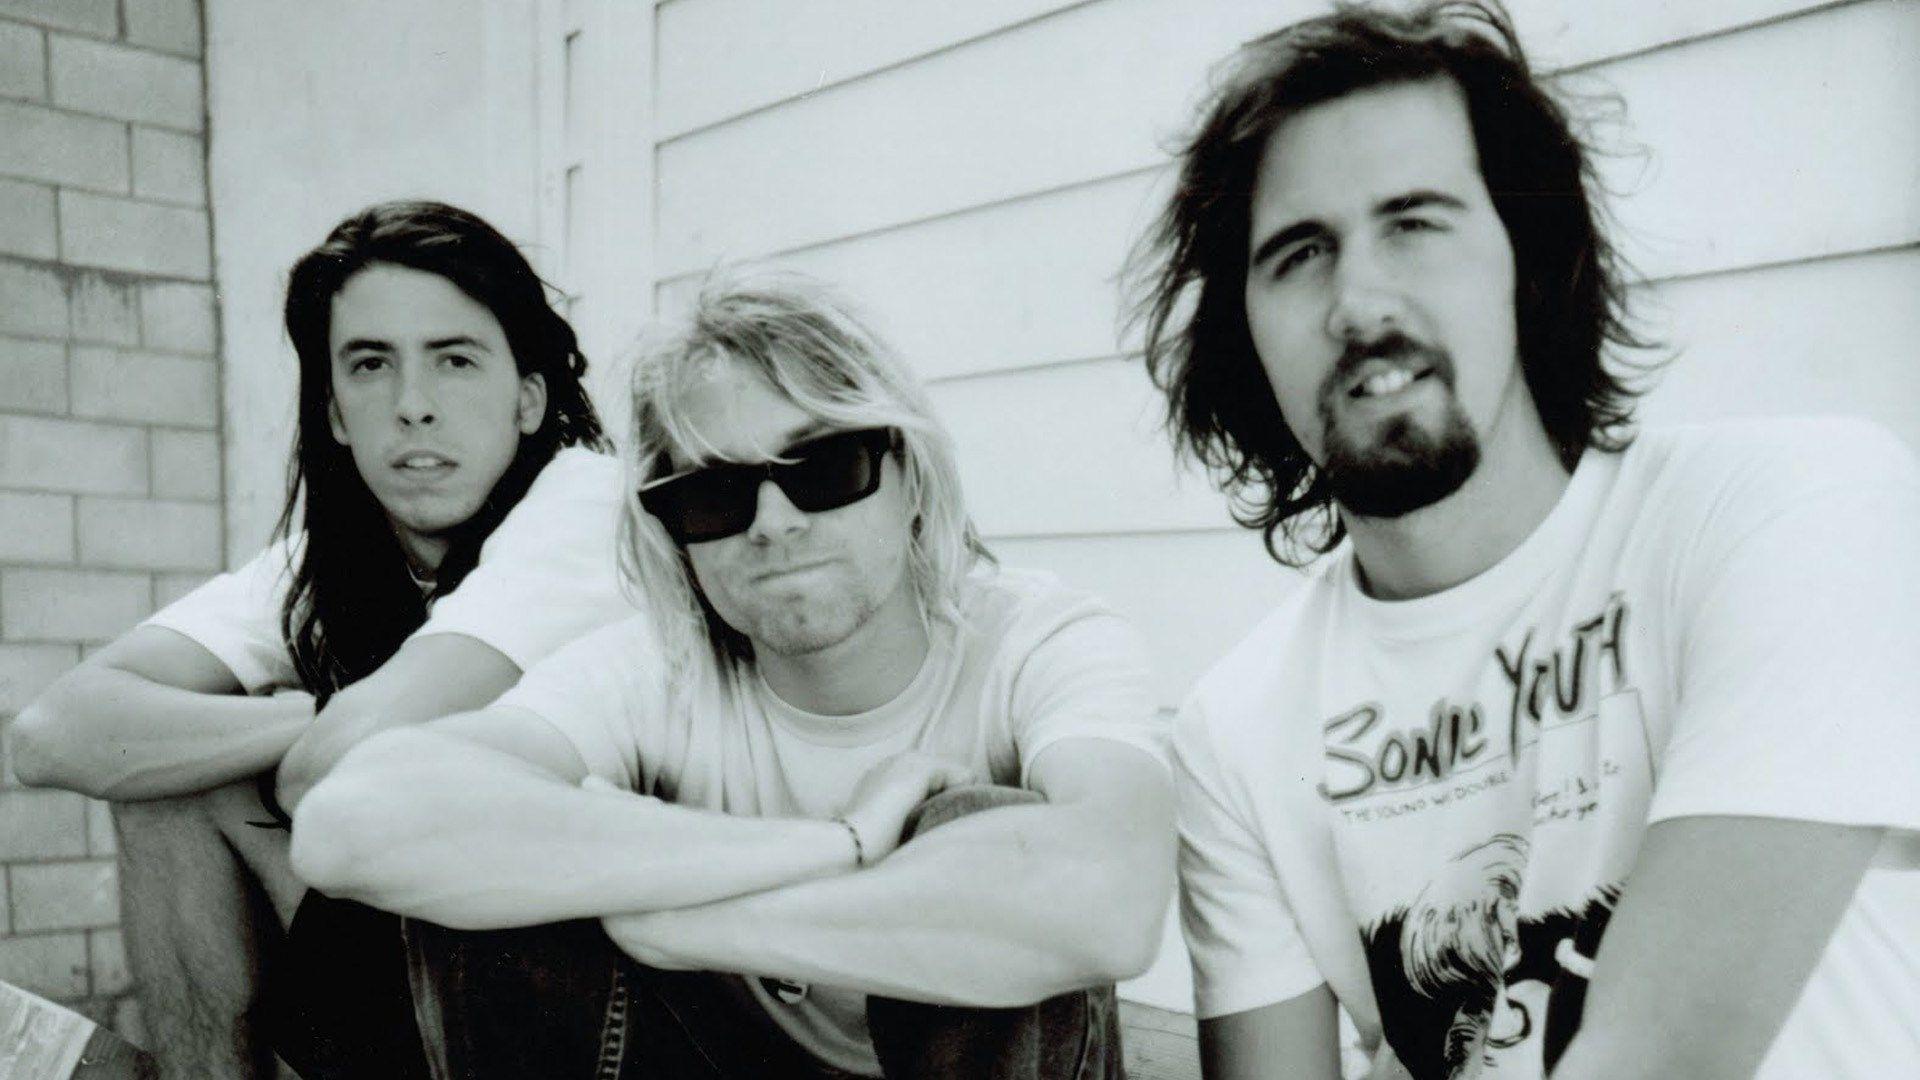 nirvana sonic youth shirt picture